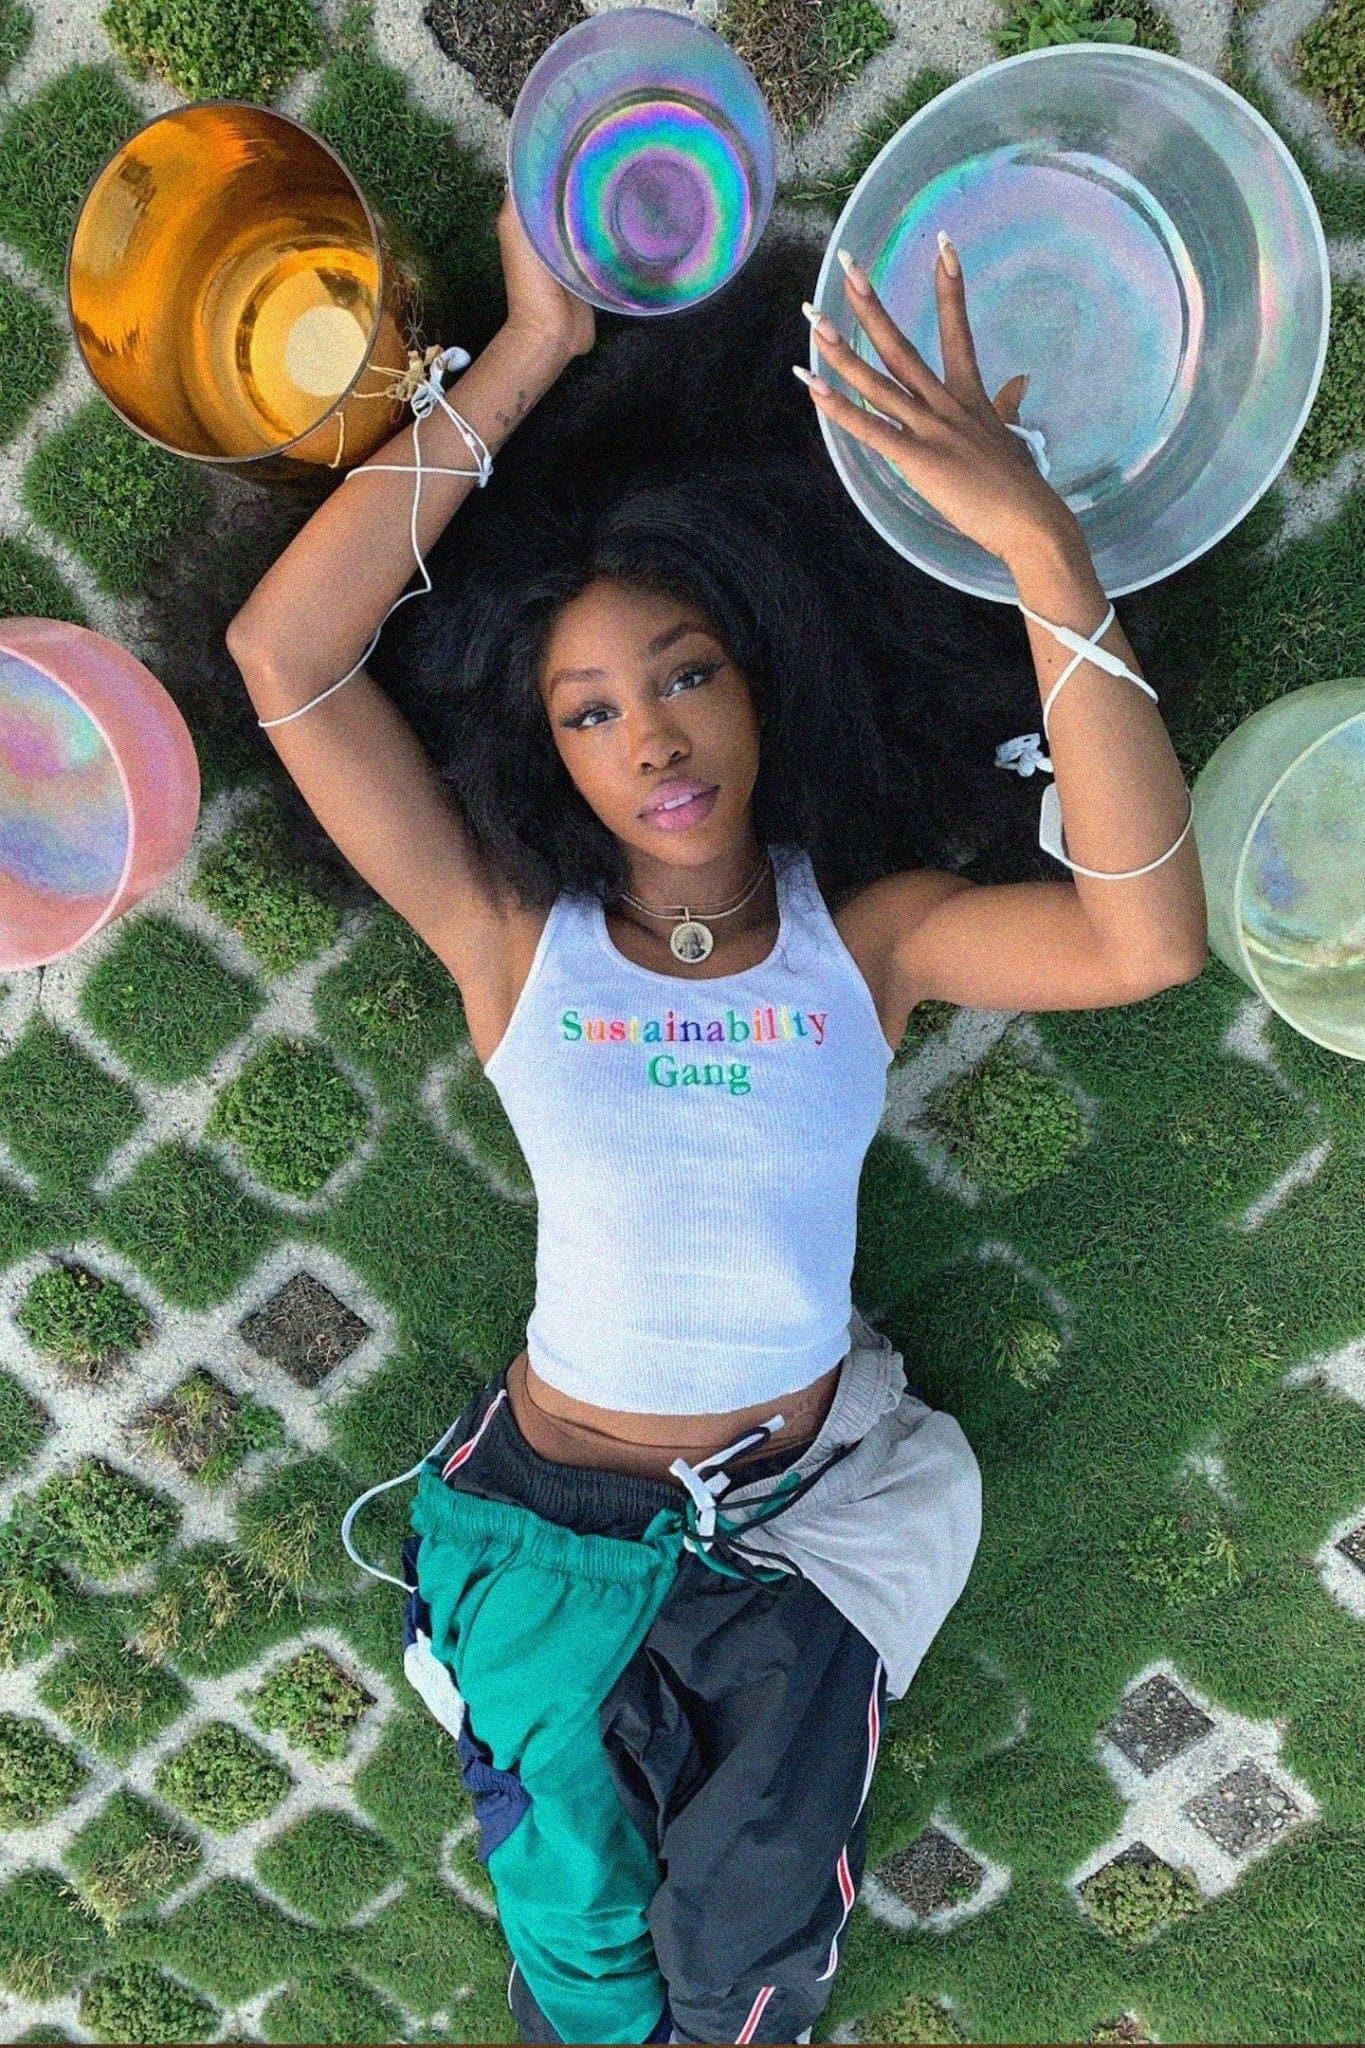 SZA 'Sustainability Gang' Poster - Posters Plug